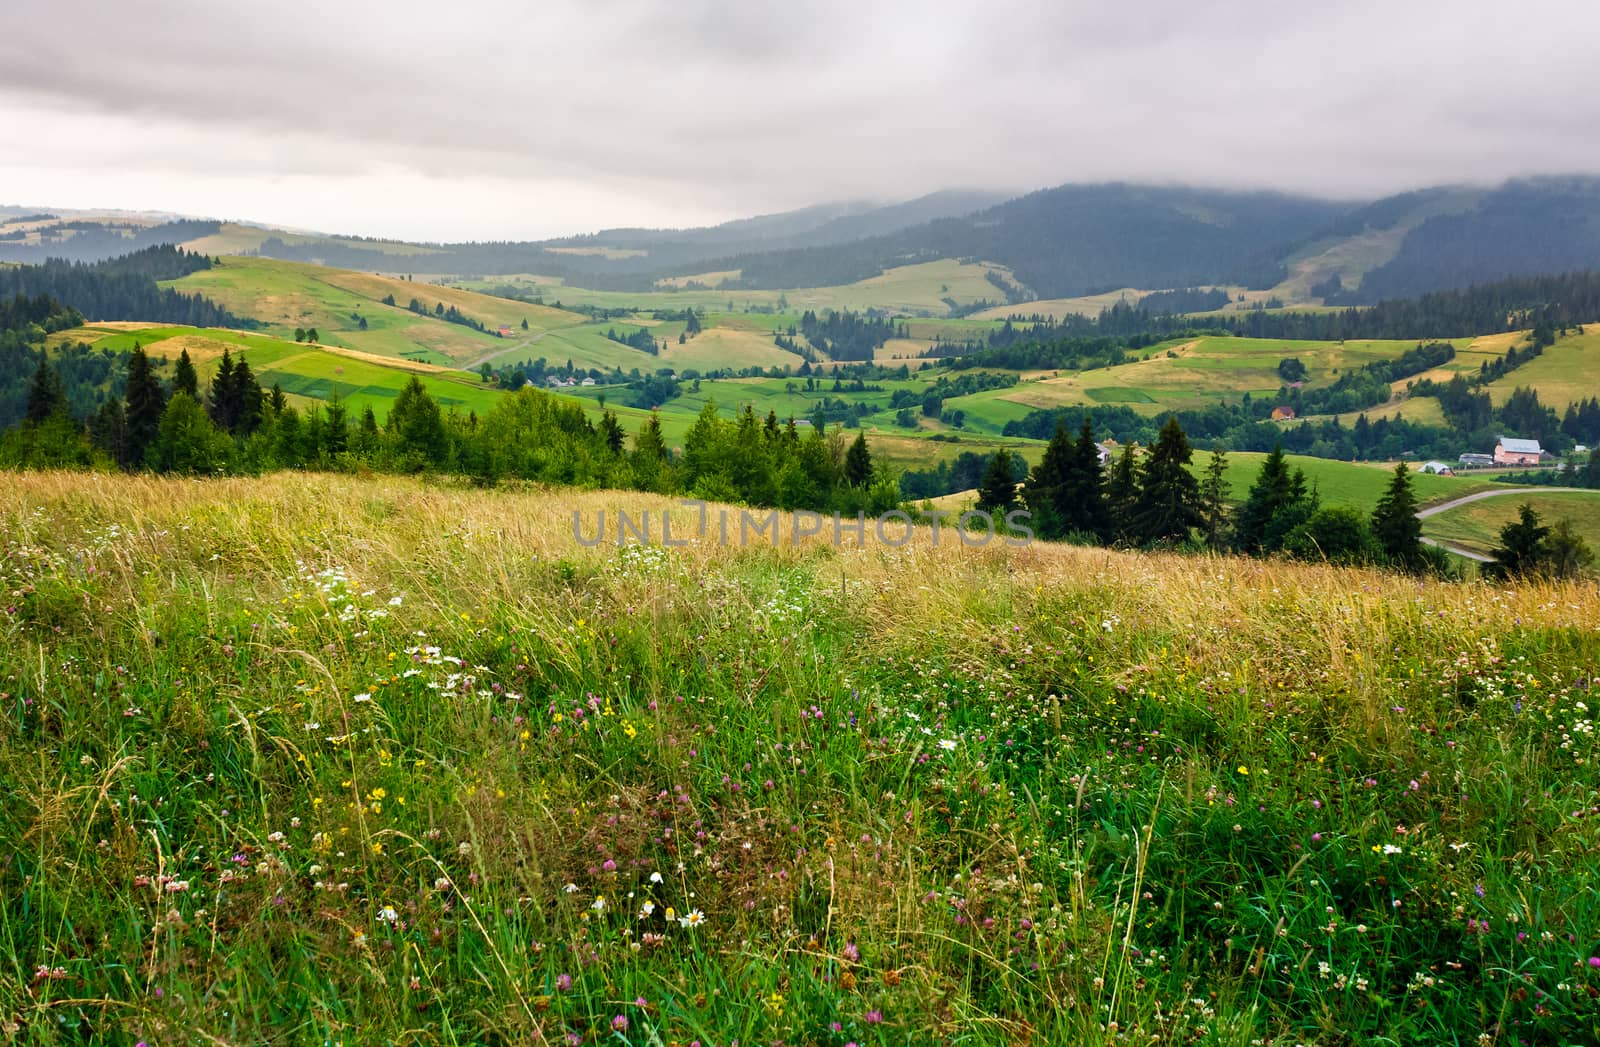 grassy meadow over the forest on a cloudy day. lovely mountainous countryside in summer time